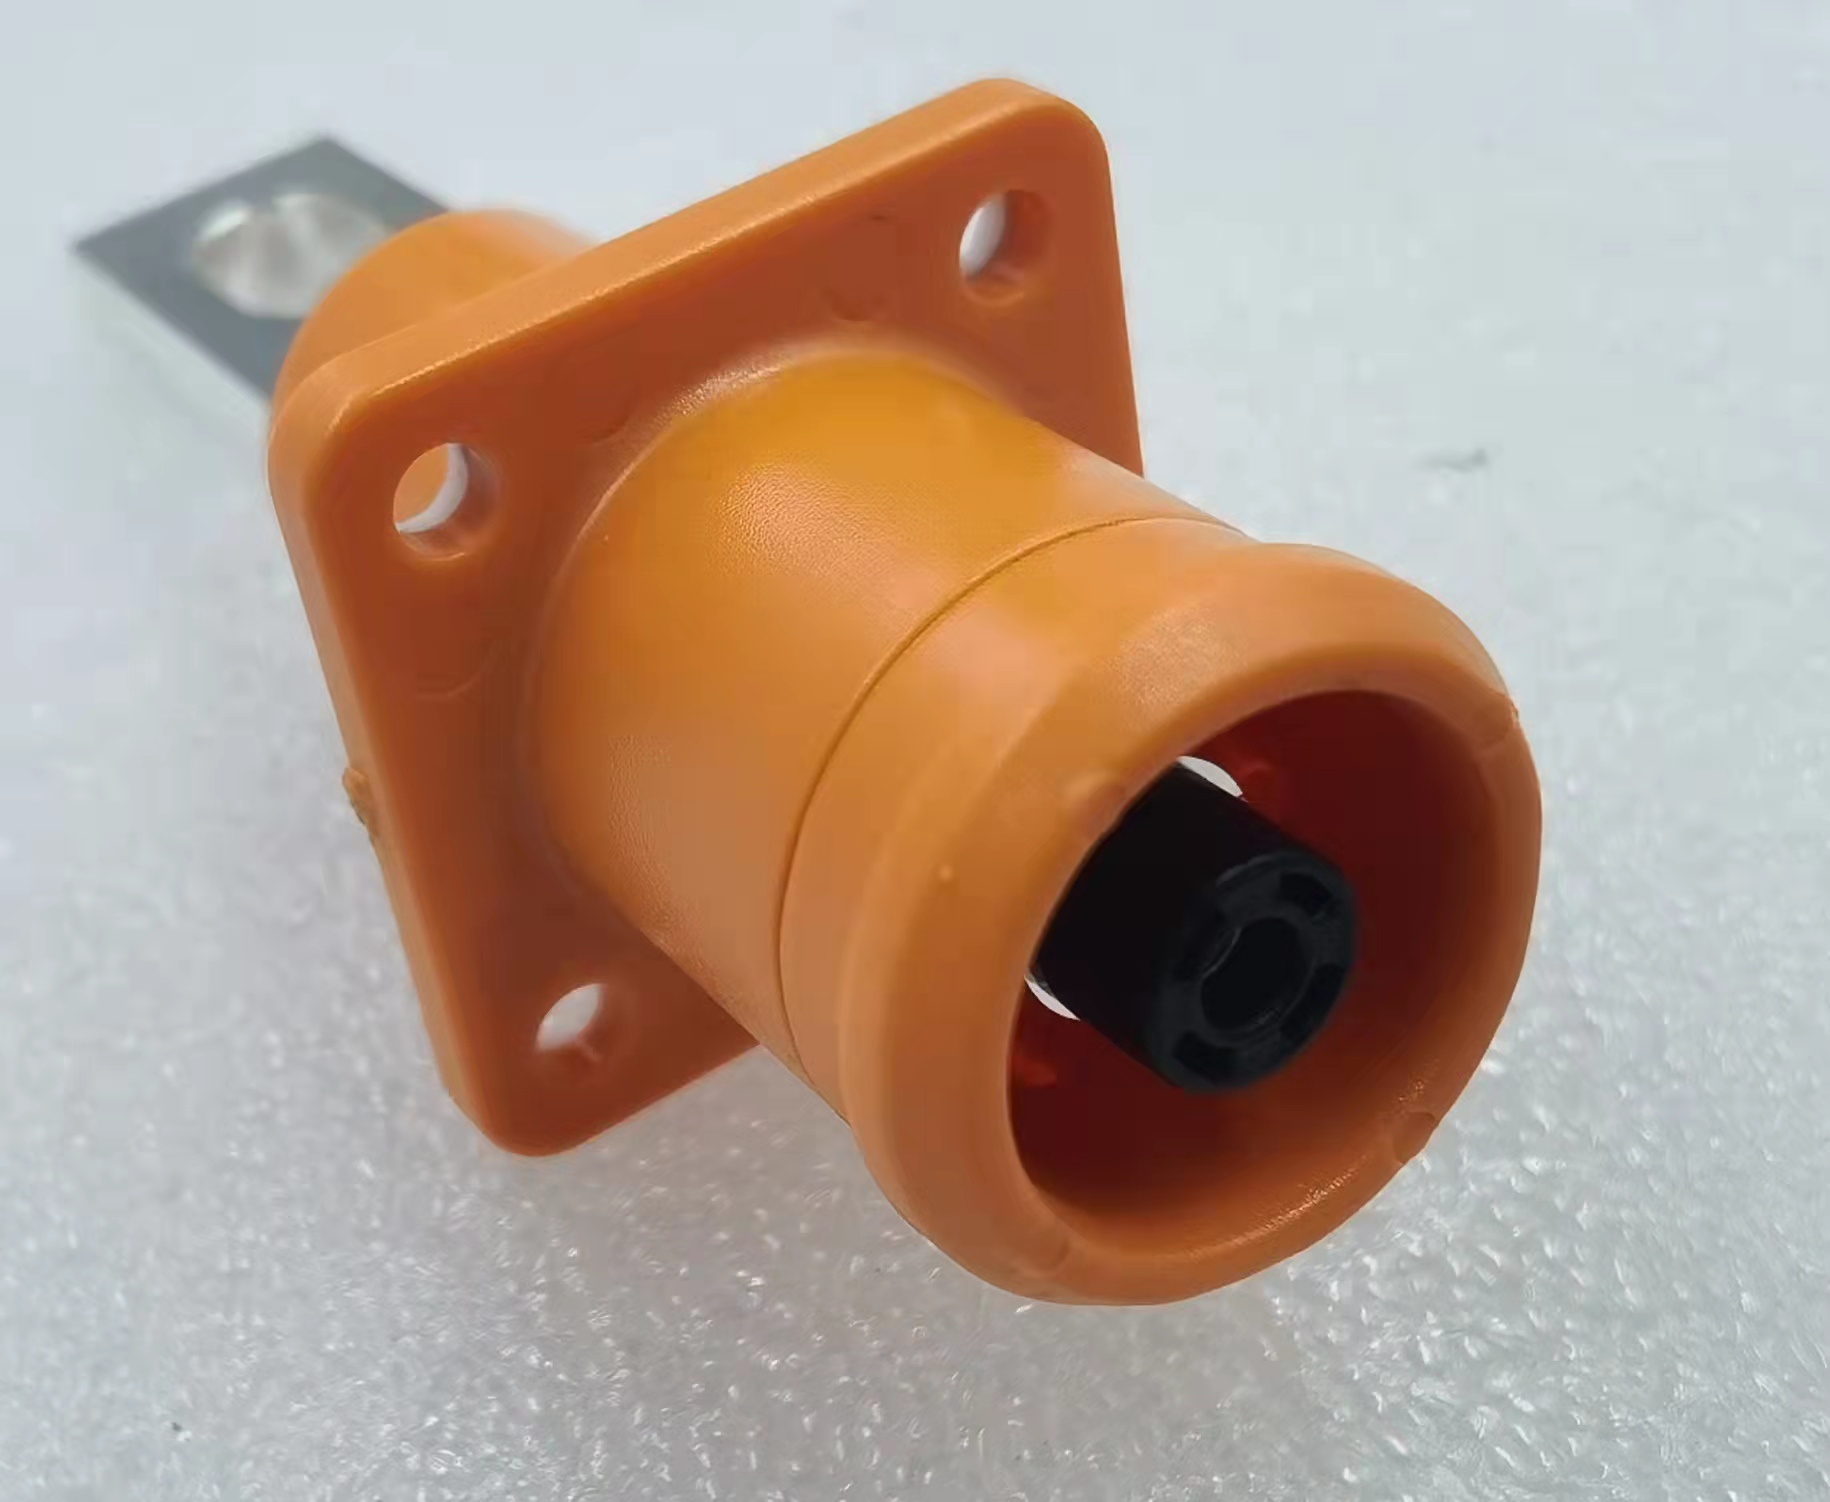 Battery energy storage 225A orange connector energy pack battery pack